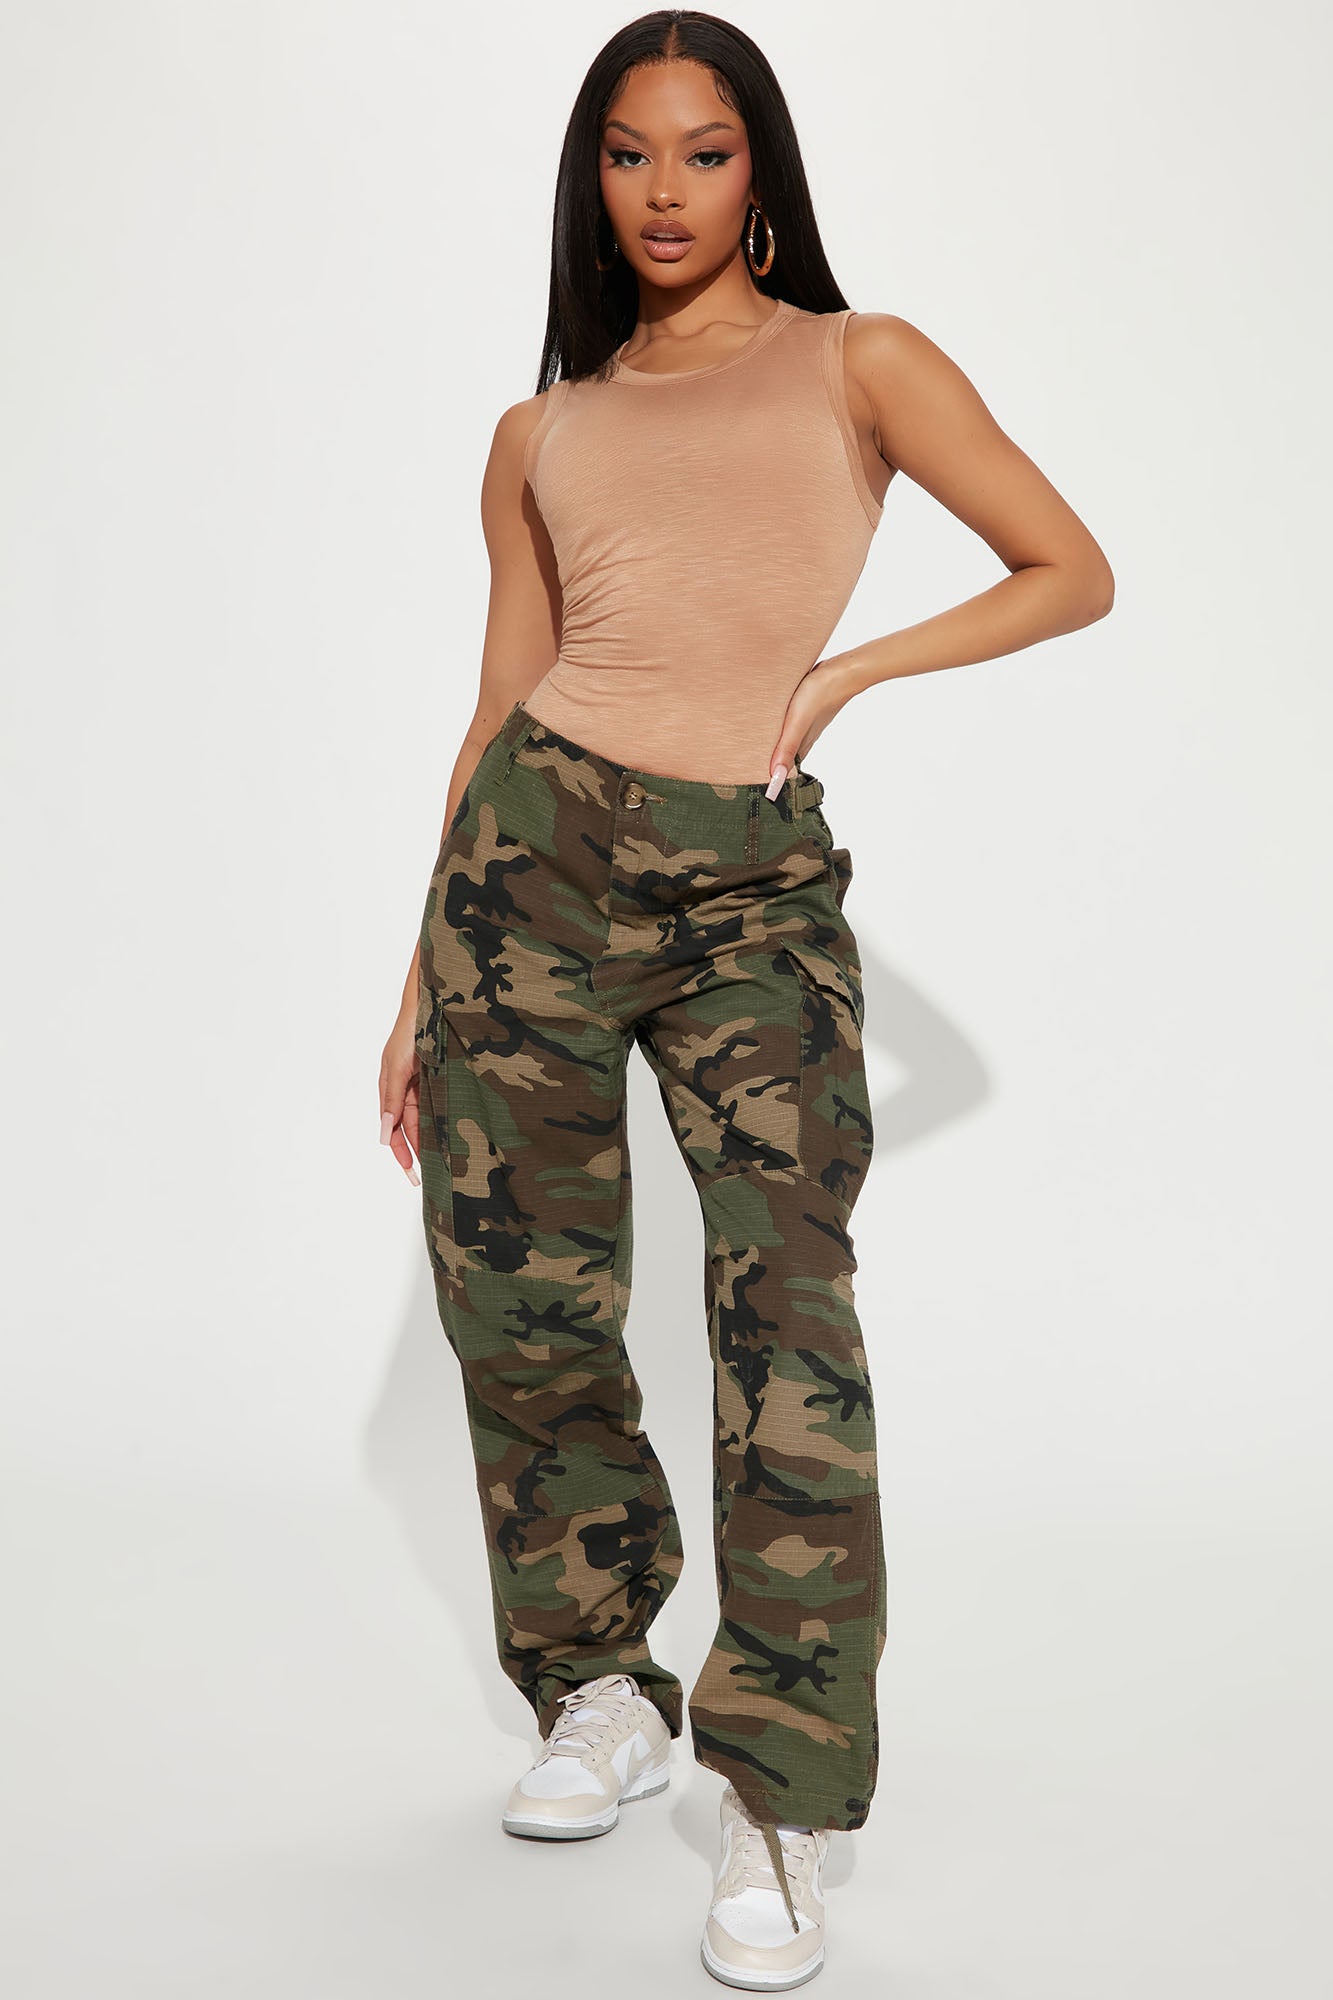 Camouflage pants women – 12 Signs